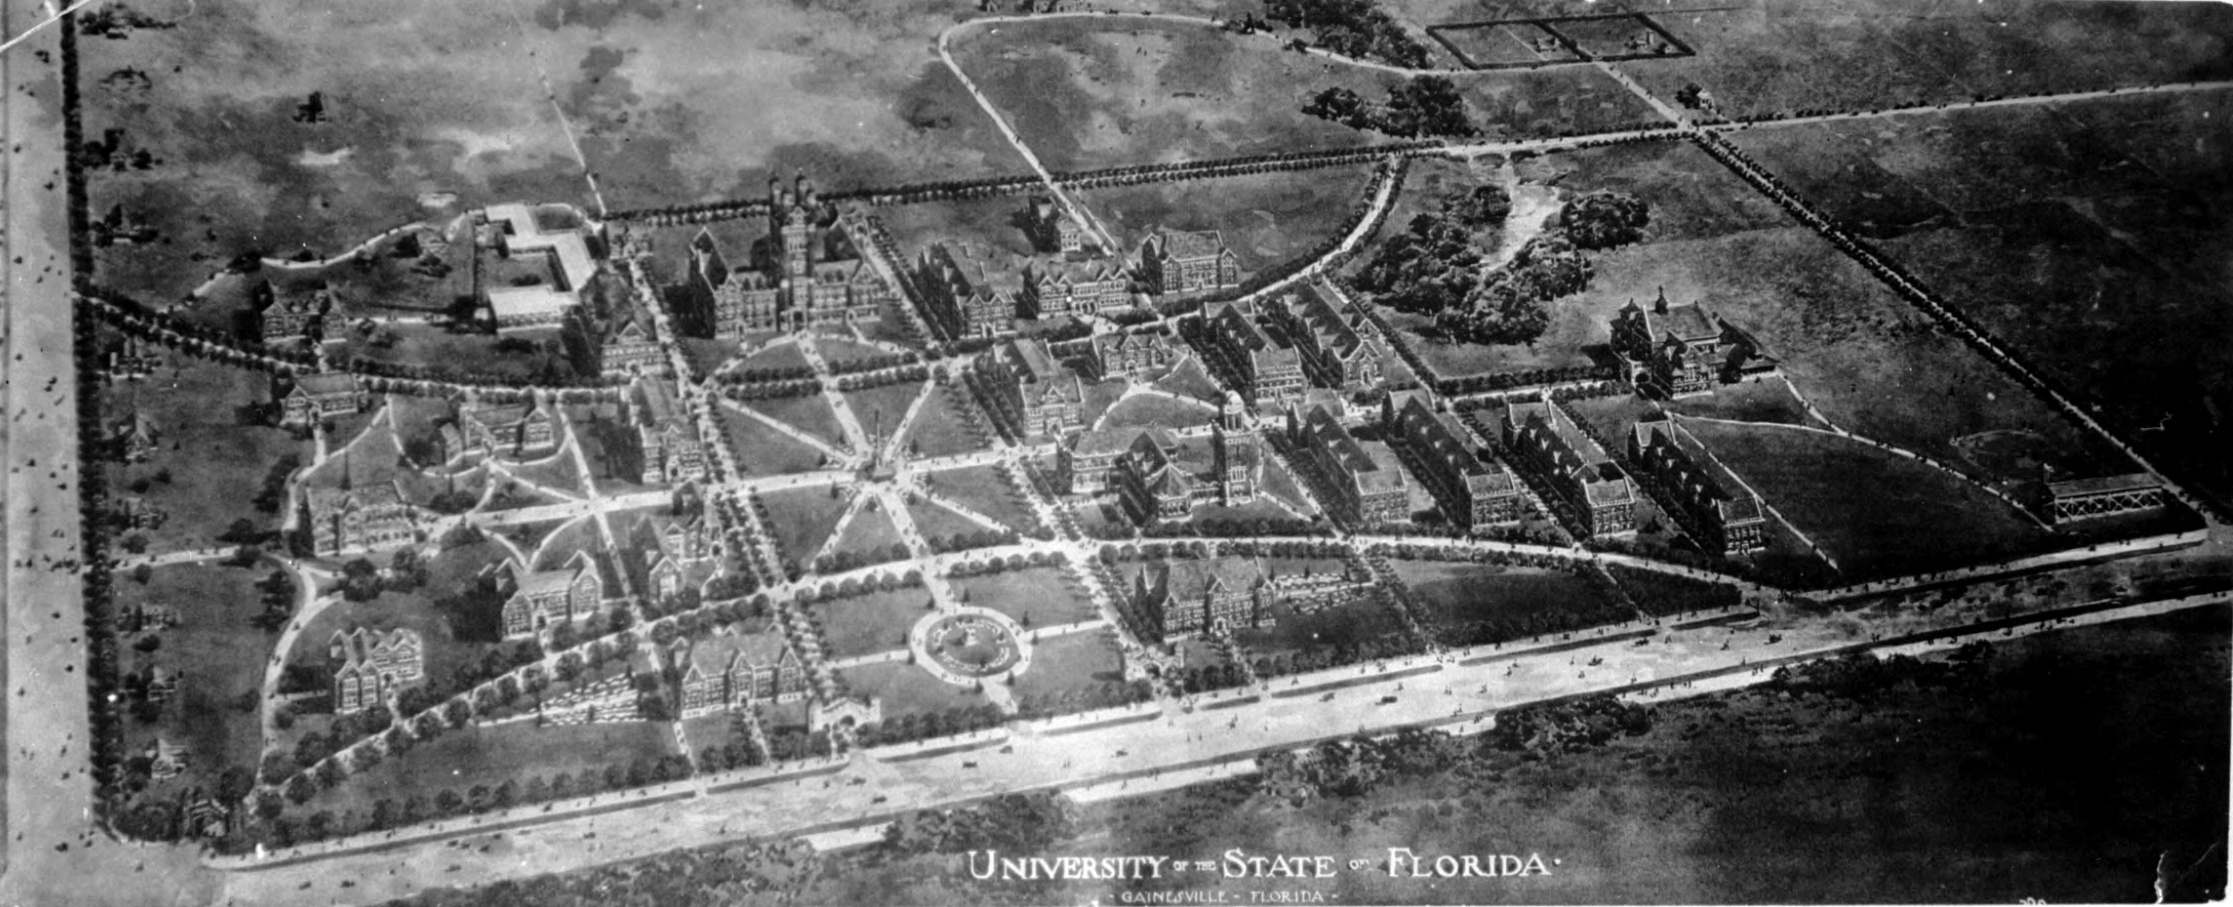 An aerial drawing of the University of Florida campus in 1910